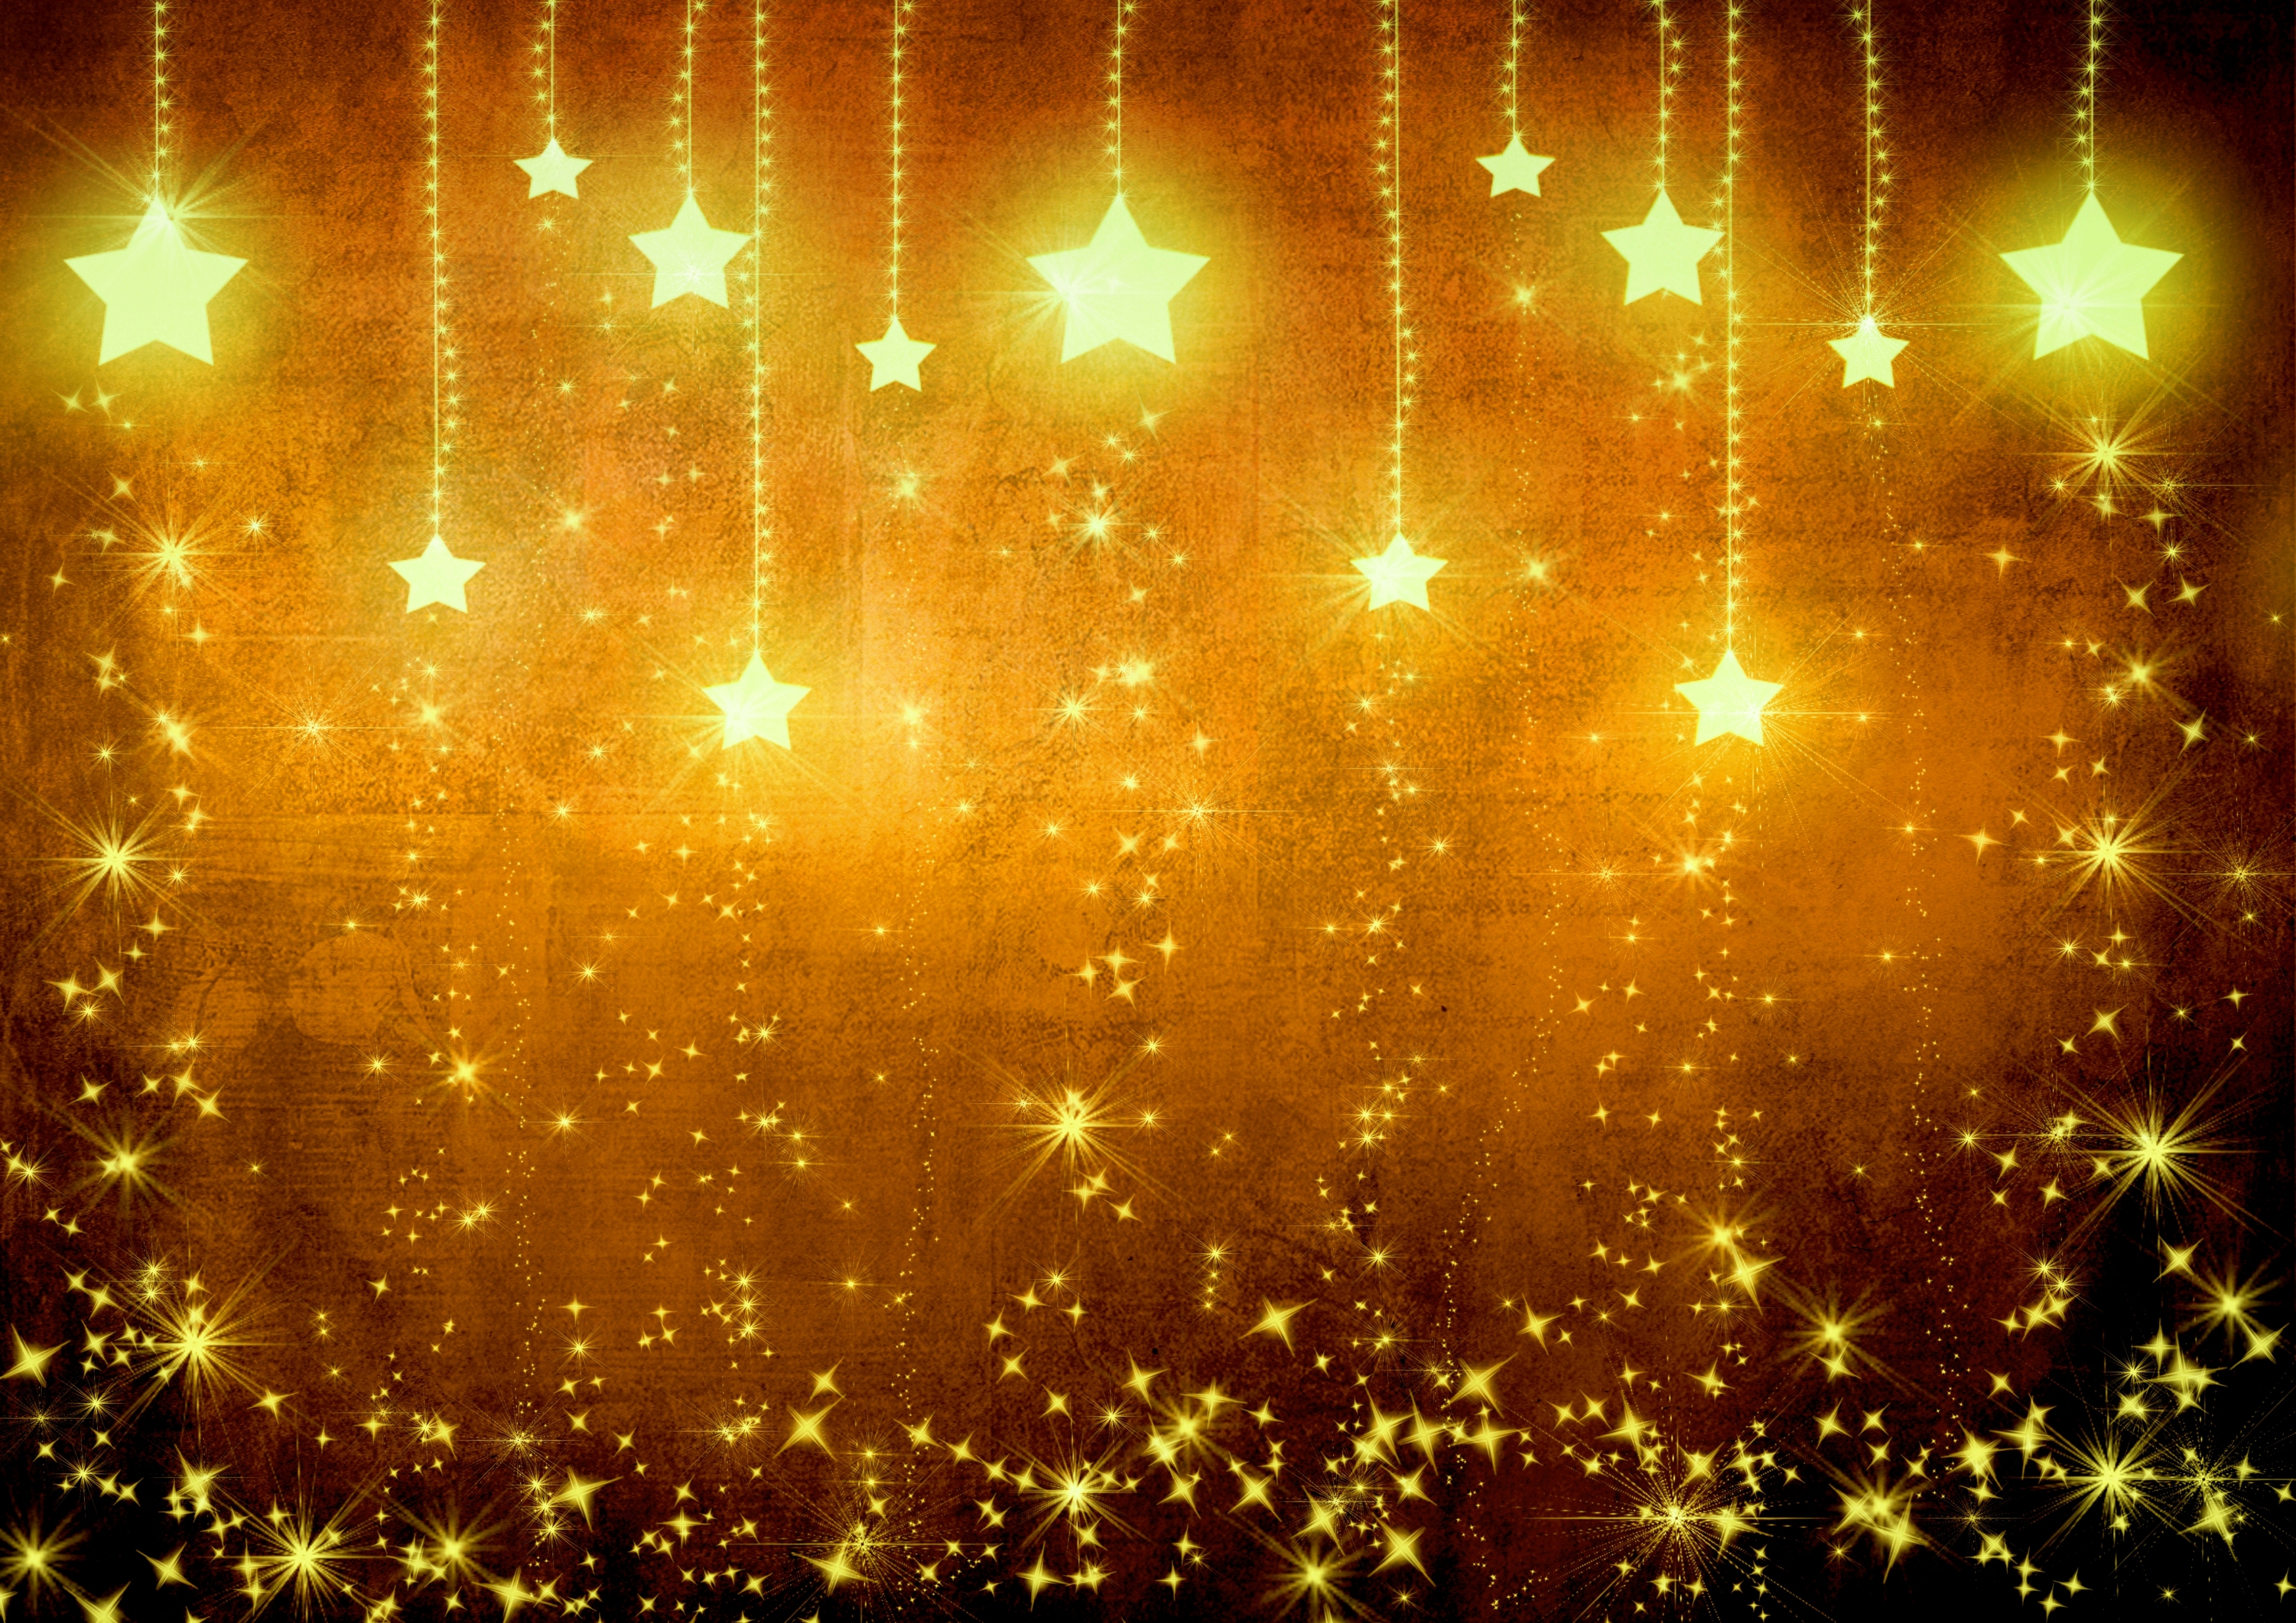 Gold Wallpaper Designs Star gold holiday background 4334x3064